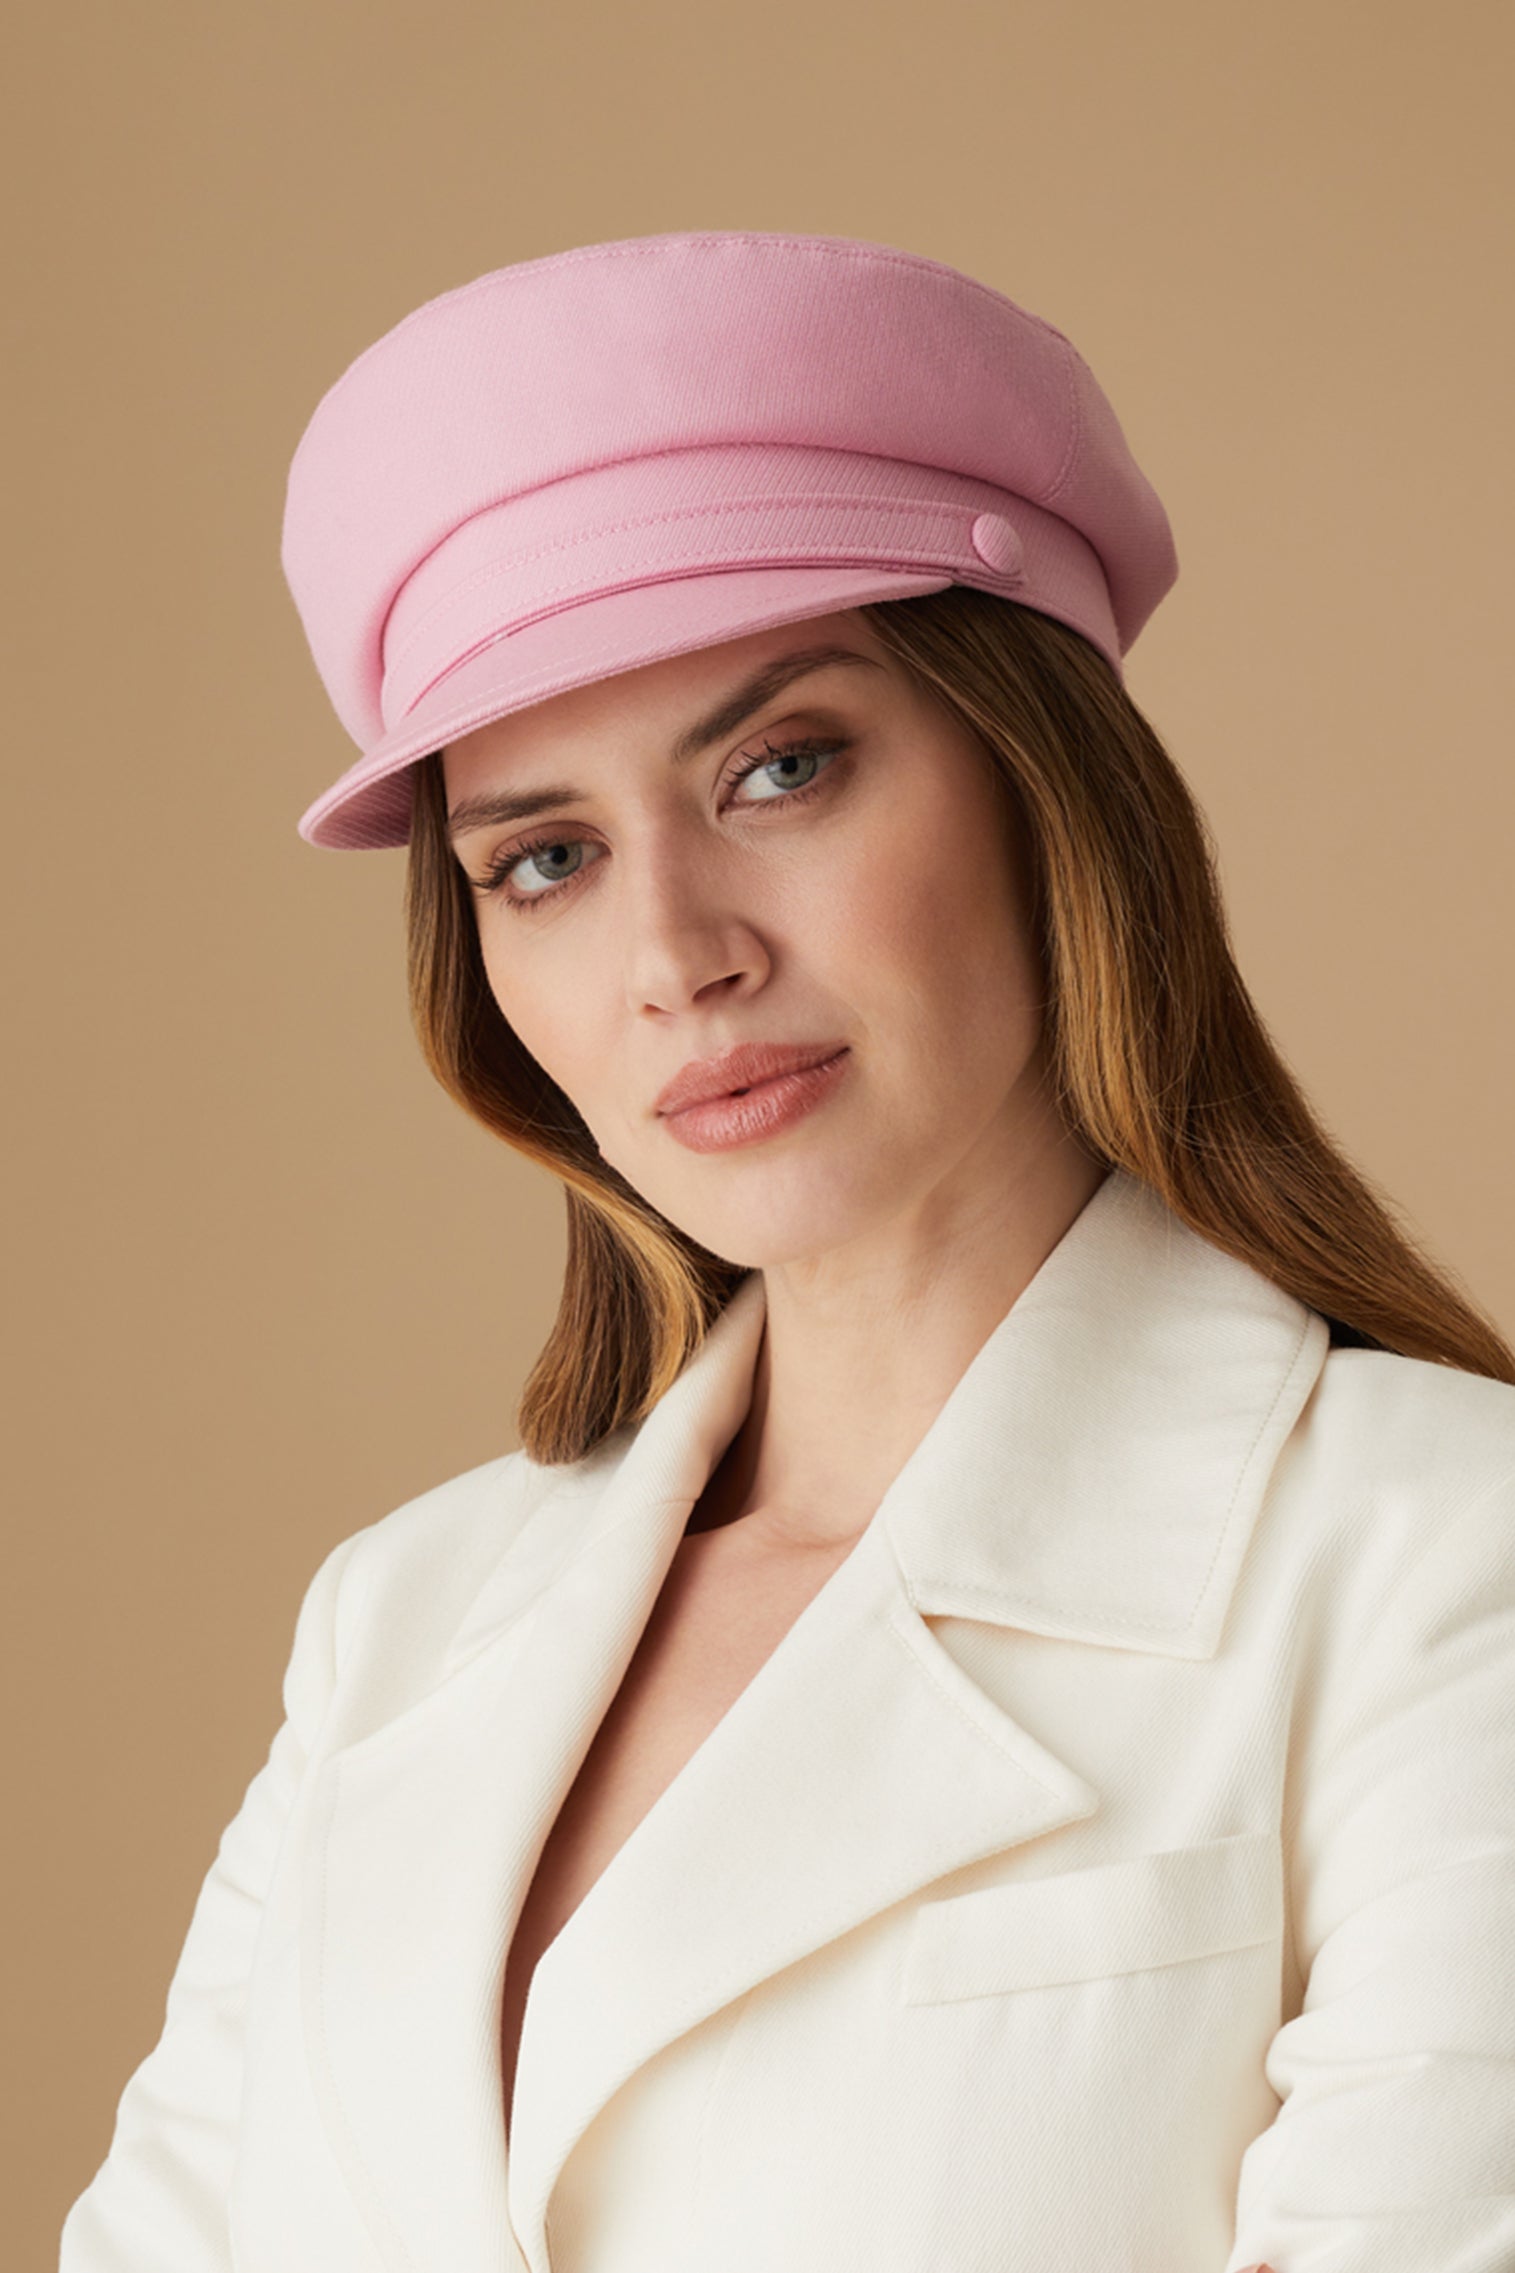 Ahoy Pink Skipper Cap - Hats for Tall People - Lock & Co. Hatters London UK